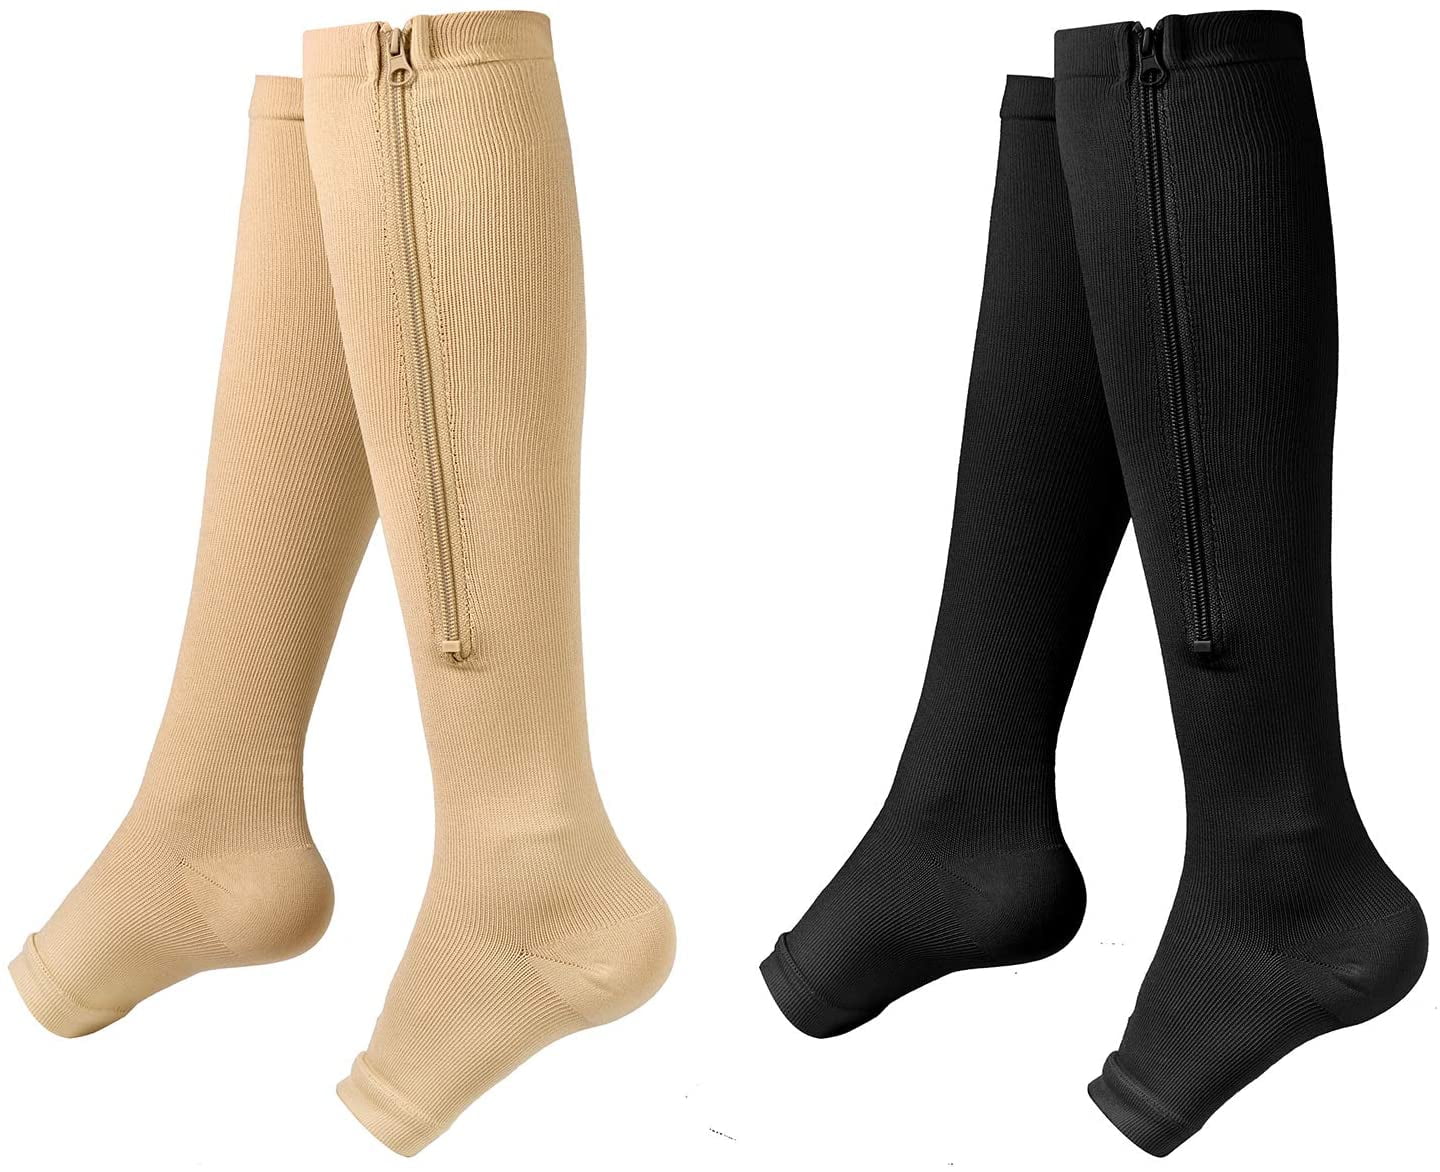 Compression Socks New Compression Zip Sox Socks Stretchy Zipper Leg Support Unisex Open Toe Knee Stockings 2 Pairs